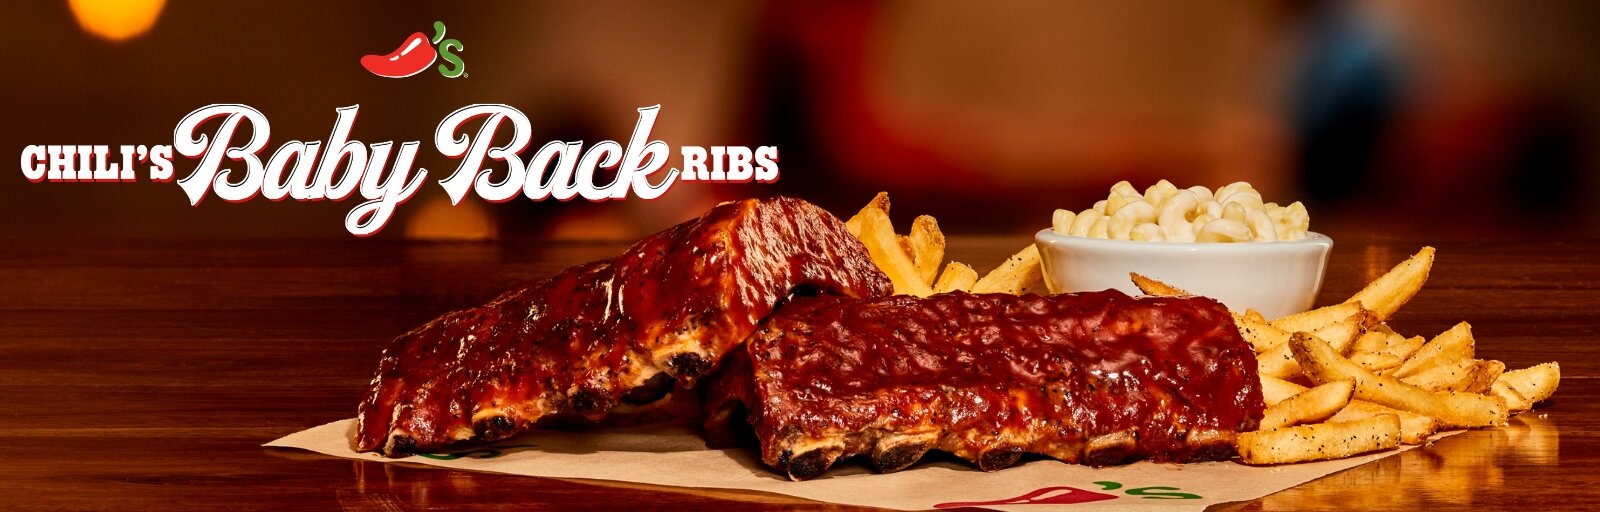 Chili's Baby Back Ribs with Fries and Mac & Cheese